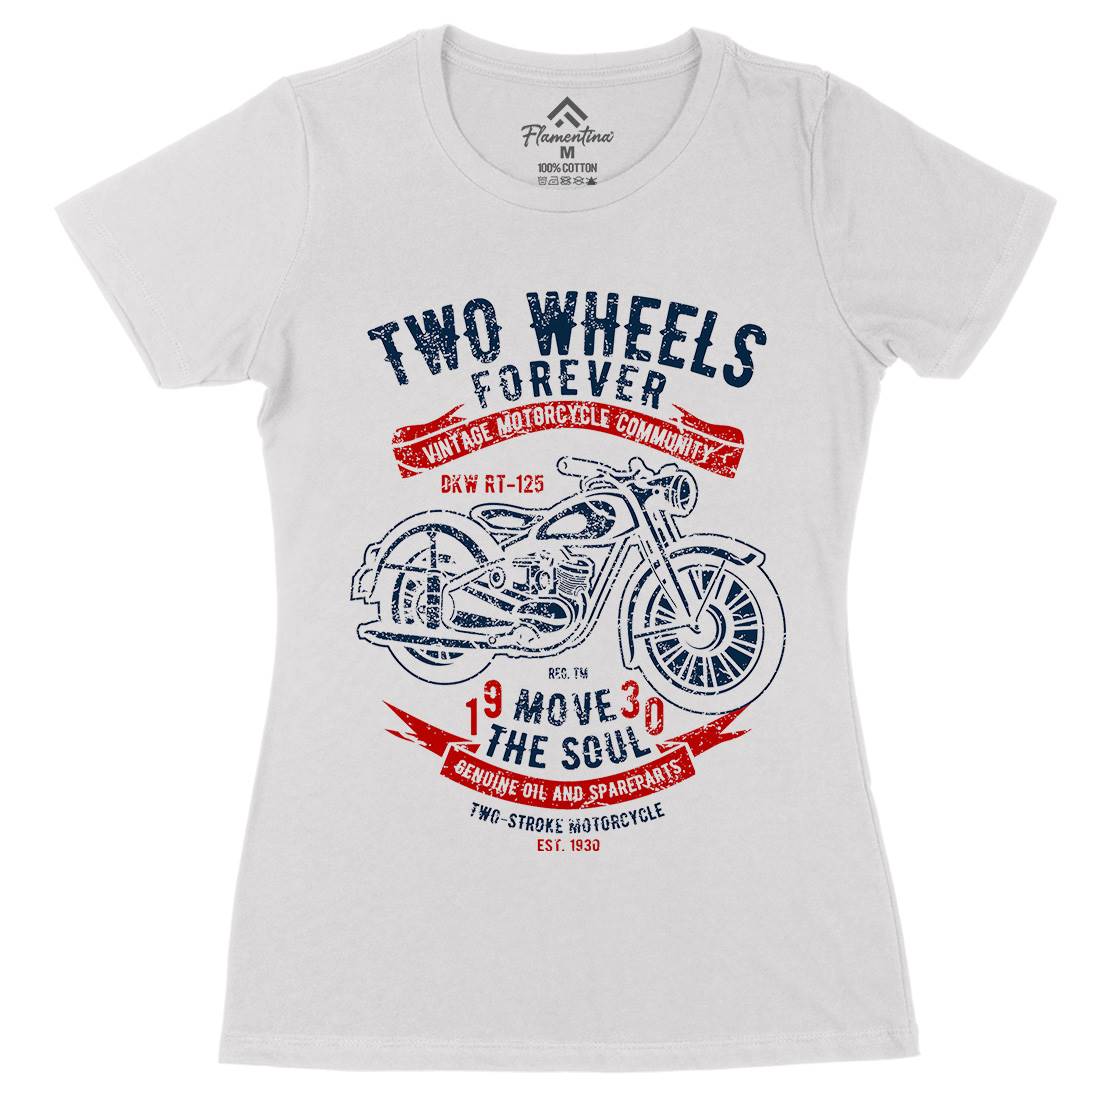 Two Wheels Forever Womens Organic Crew Neck T-Shirt Motorcycles A187